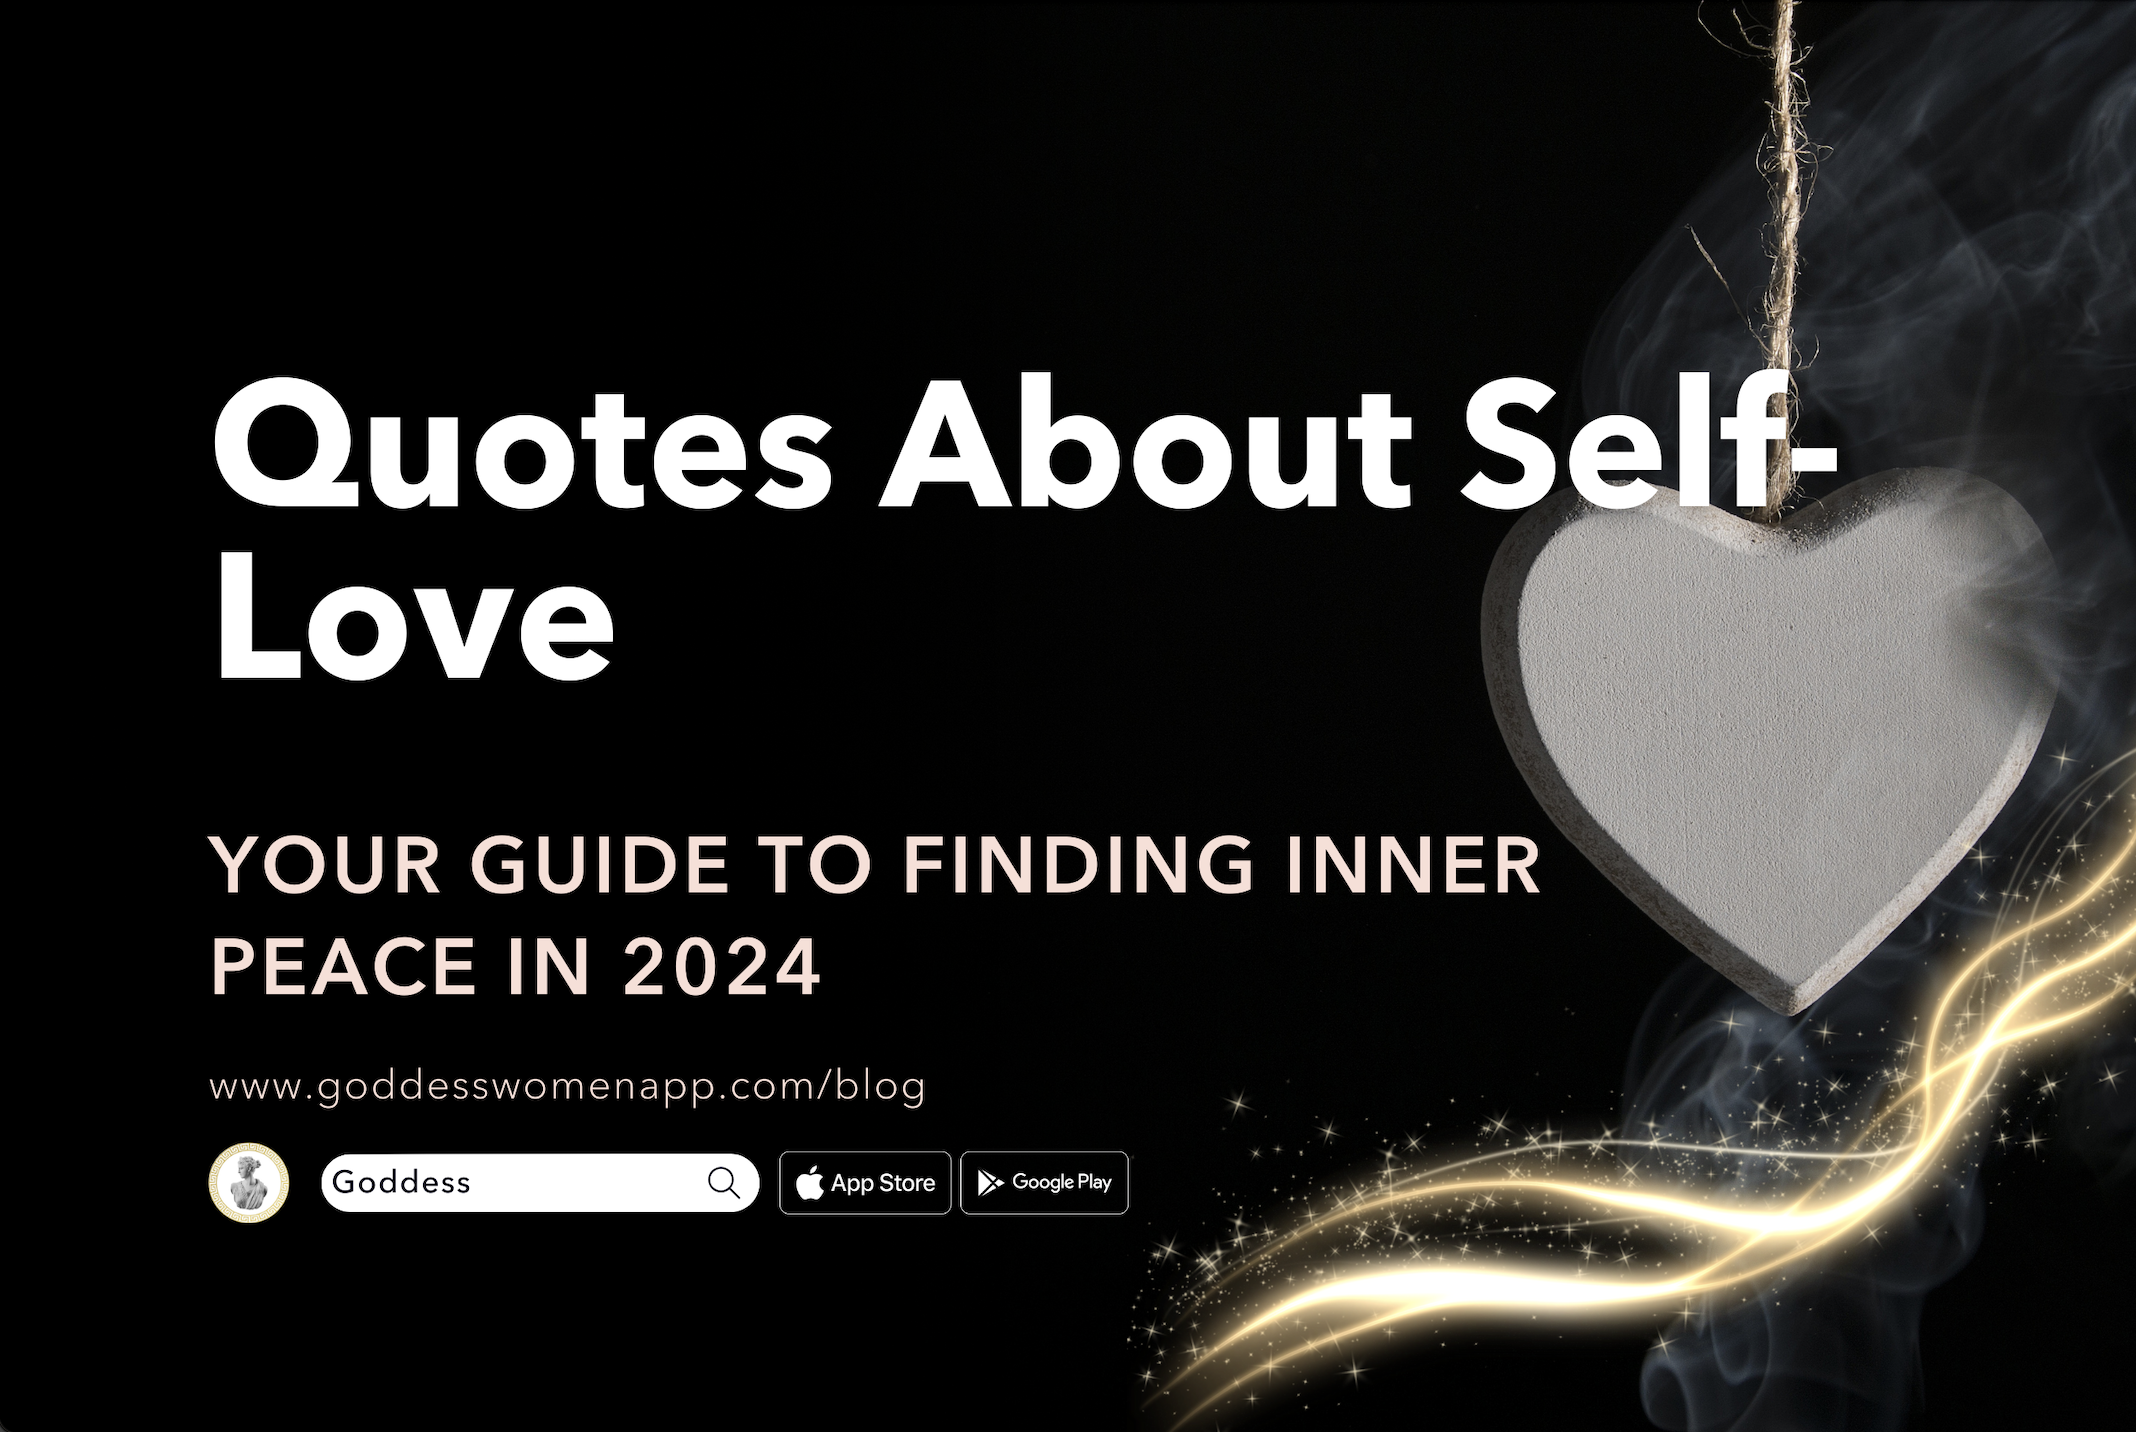 Best Quotes About Self-Love: Your Guide to Finding Inner Peace in 2024